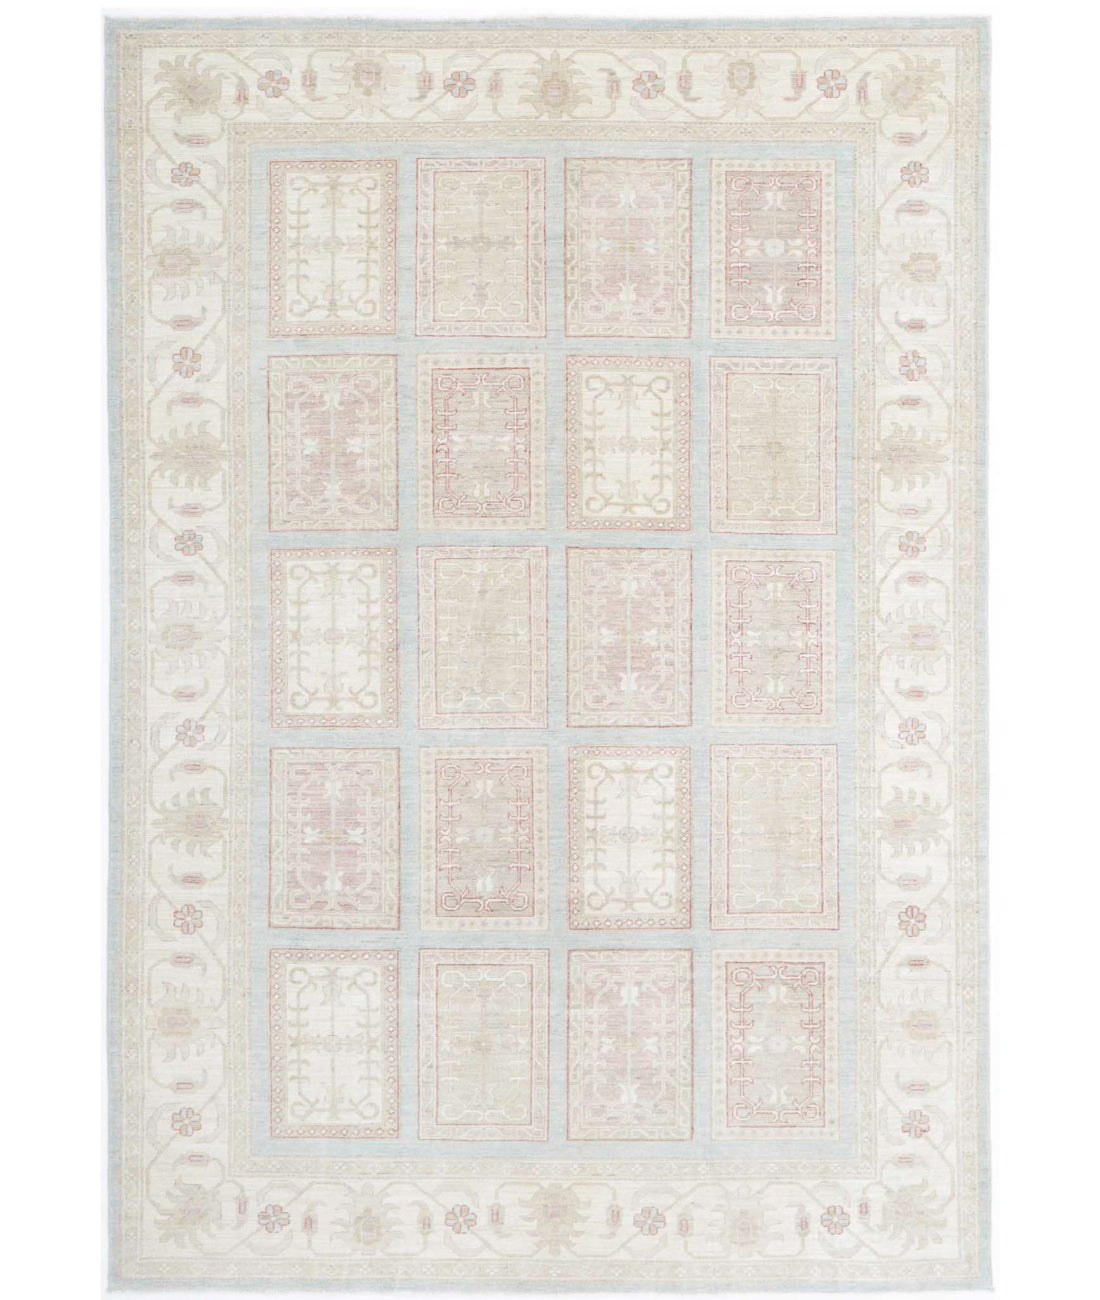 Hand Knotted Serenity Wool Rug - 6&#39;8&#39;&#39; x 9&#39;8&#39;&#39; 6&#39;8&#39;&#39; x 9&#39;8&#39;&#39; (200 X 290) / Blue / Ivory